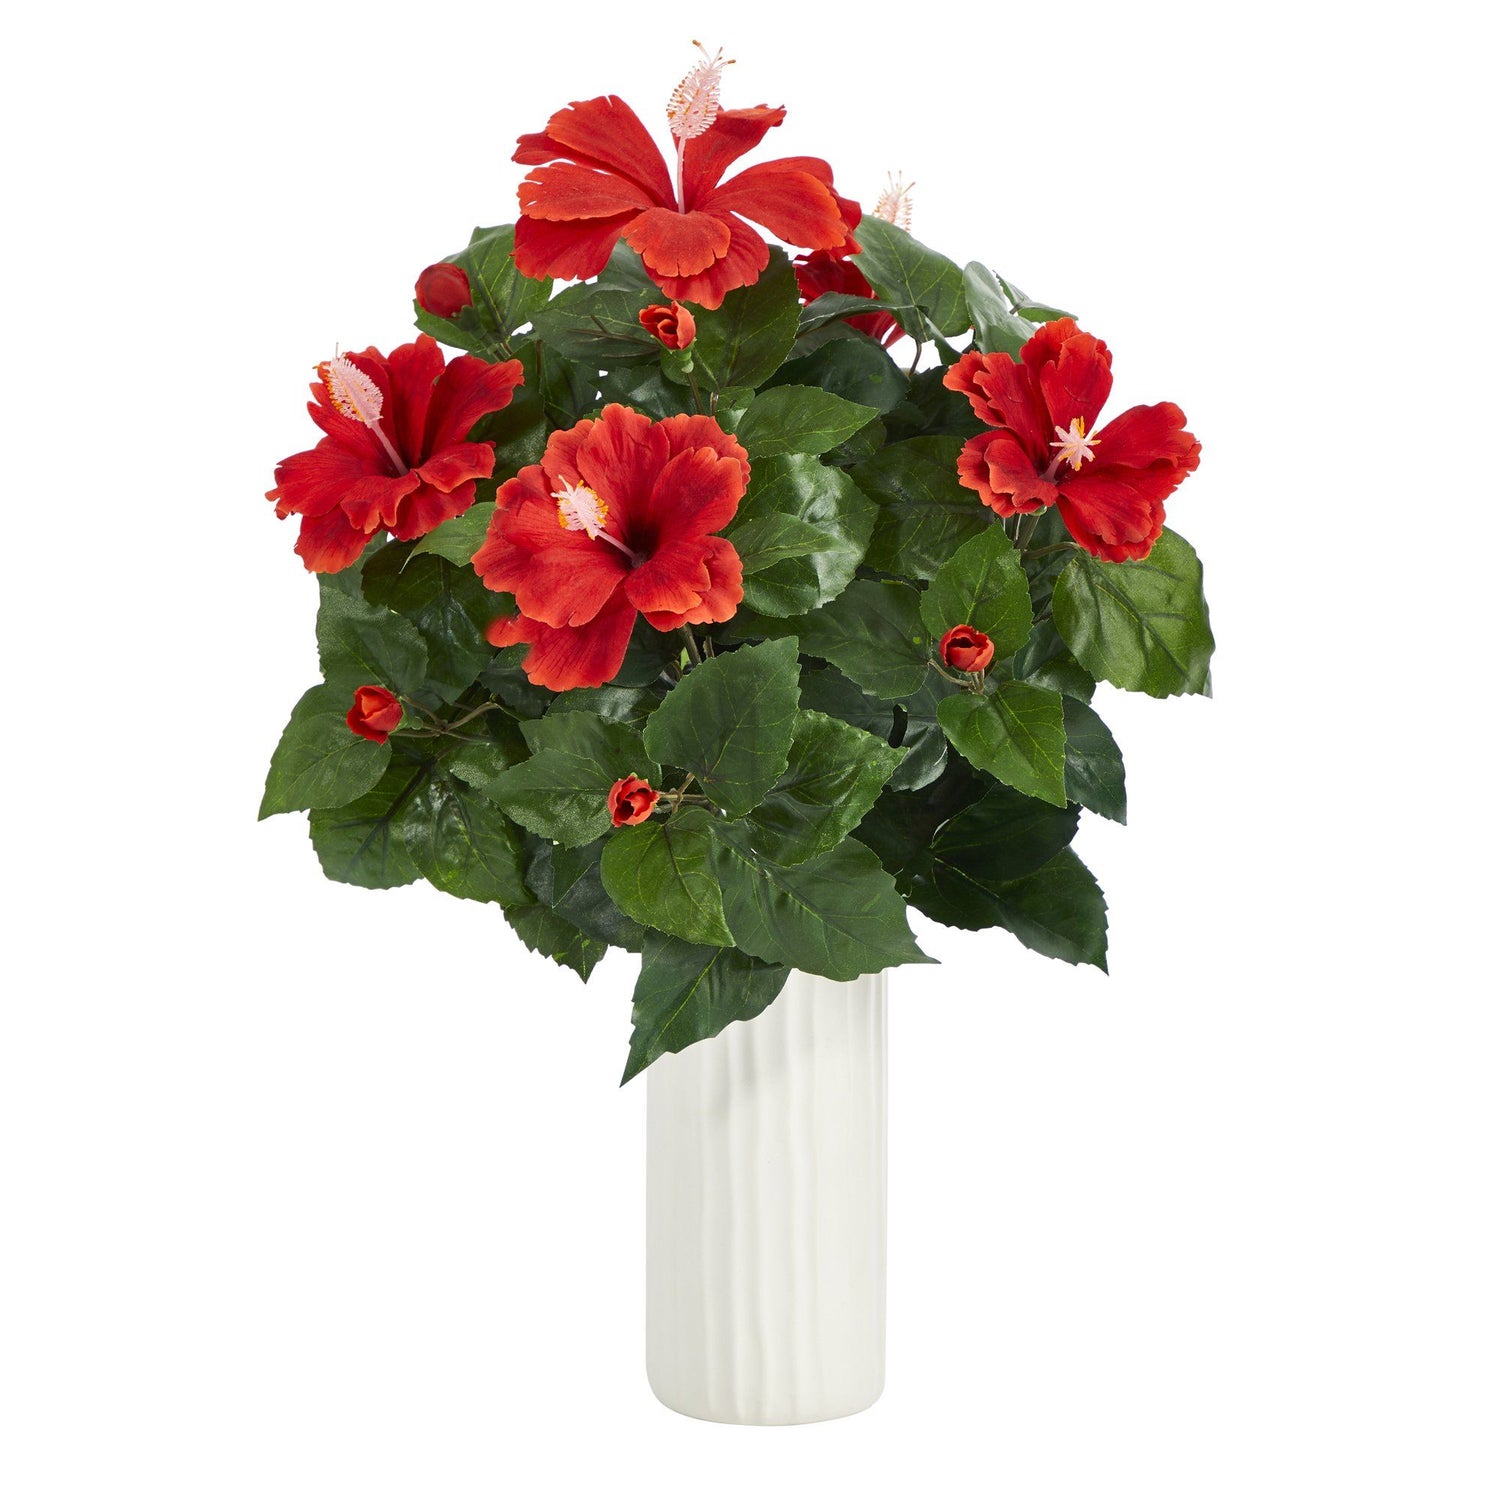 20” Hibiscus Artificial Plant Artificial Plant in White Planter